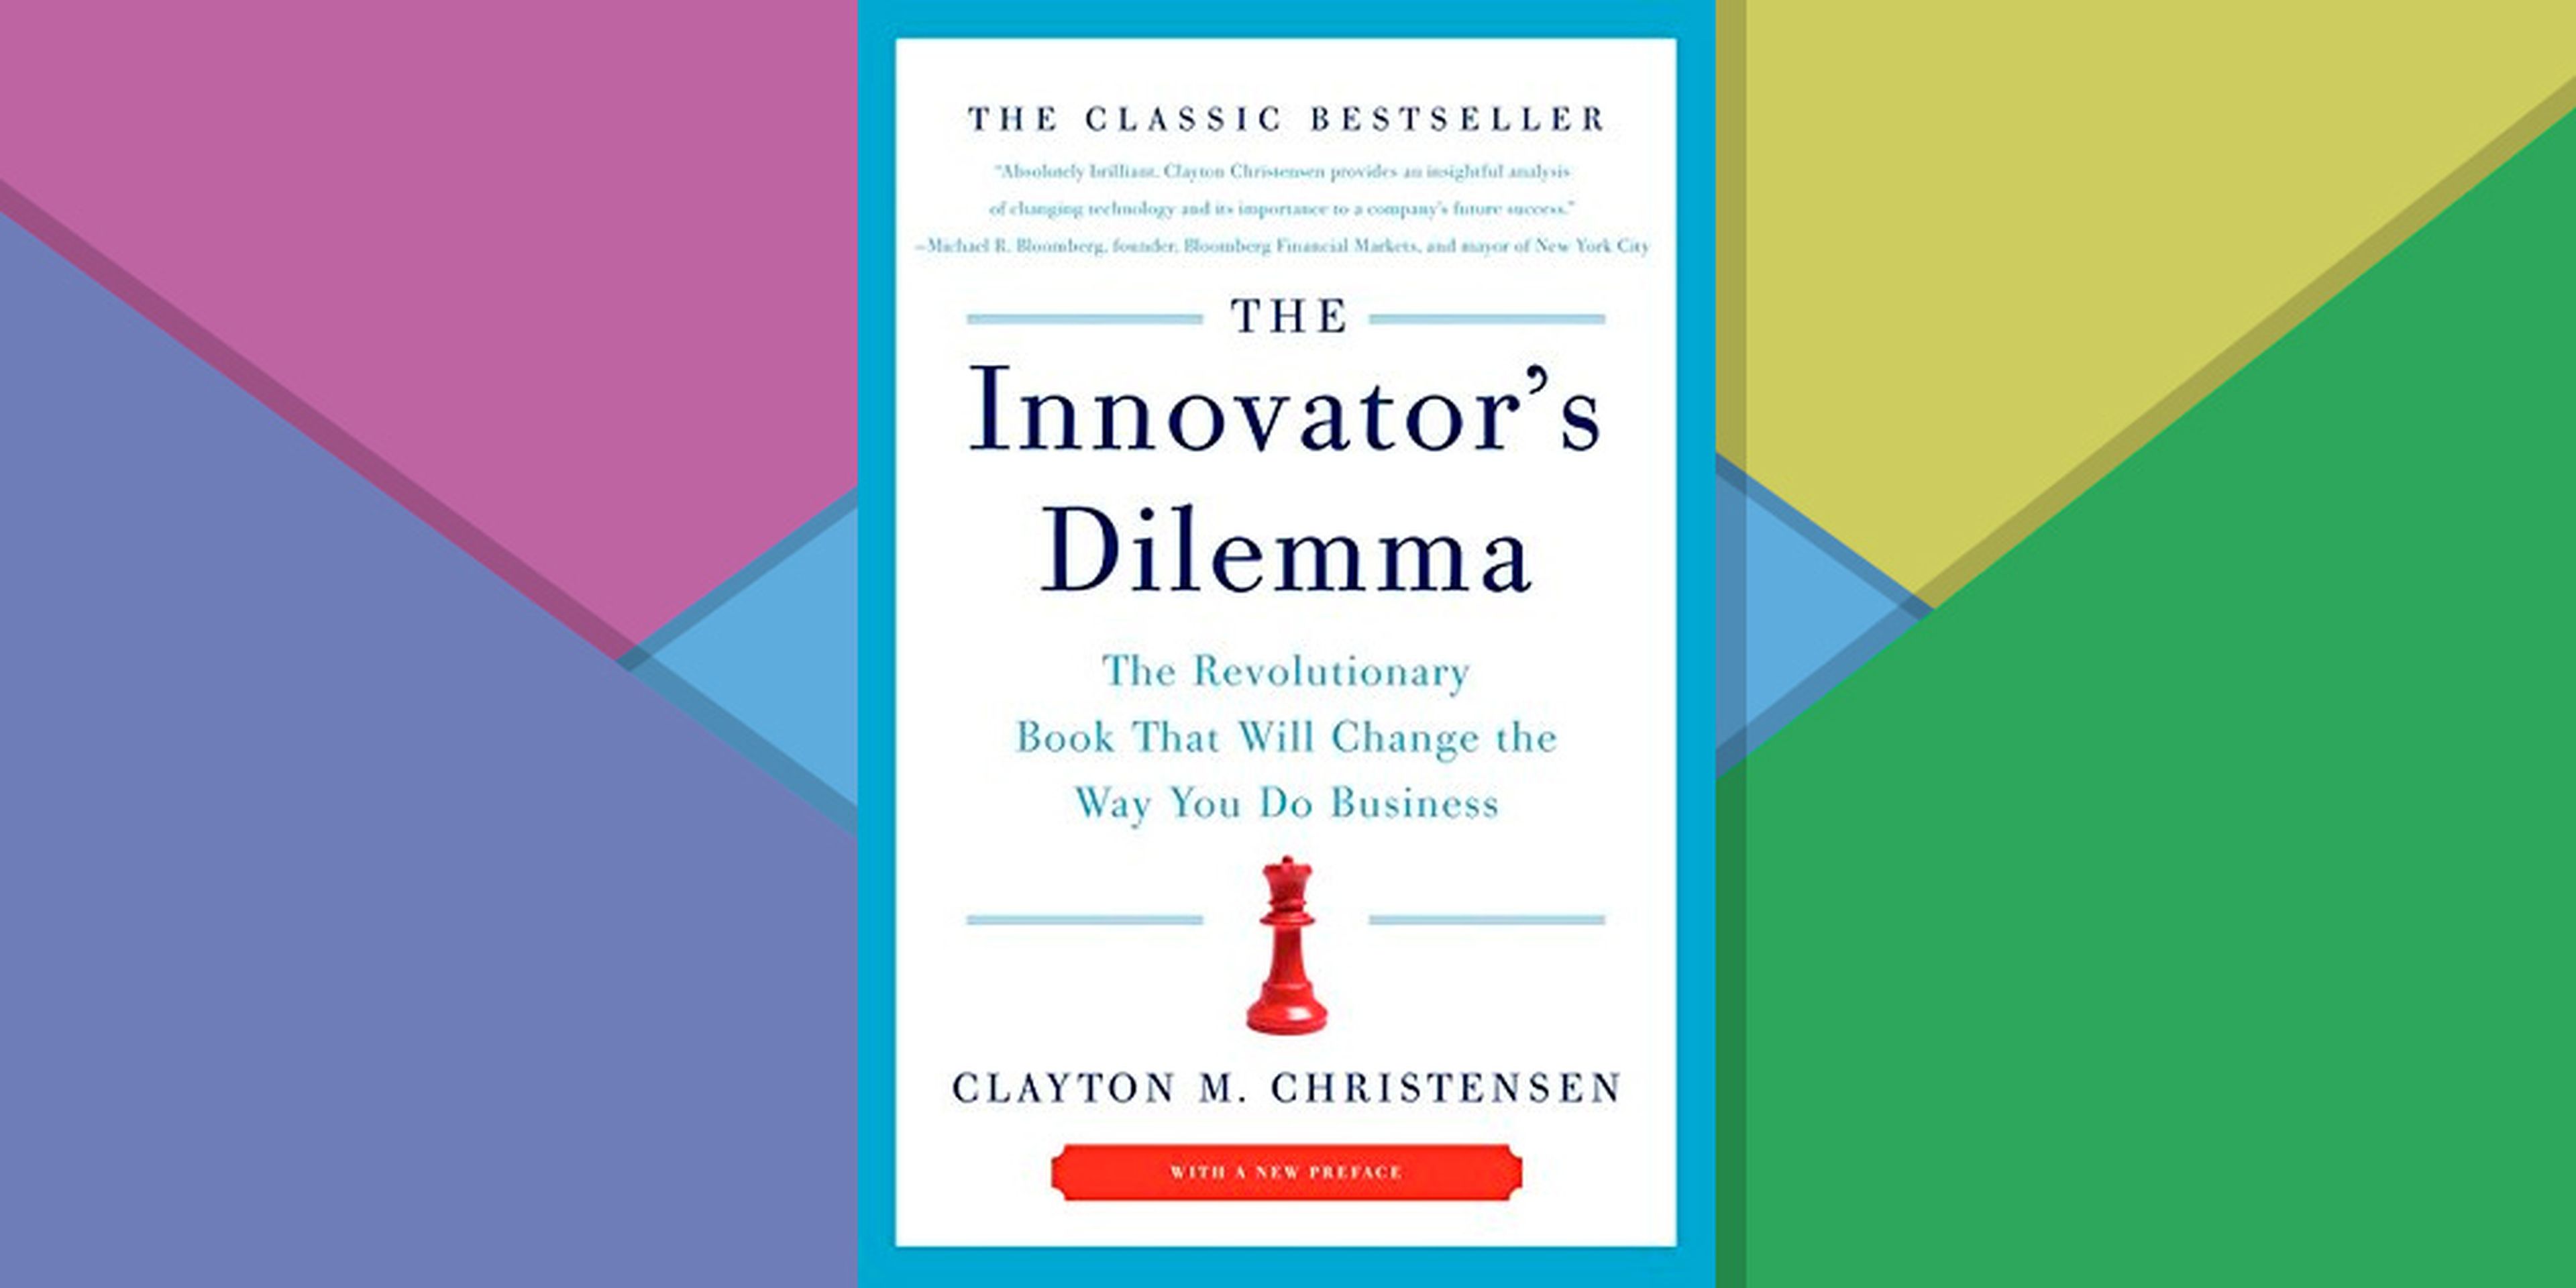 Steve Jobs: "The Innovator's Dilemma: The Revolutionary Book That Will Change the Way You Do Business"